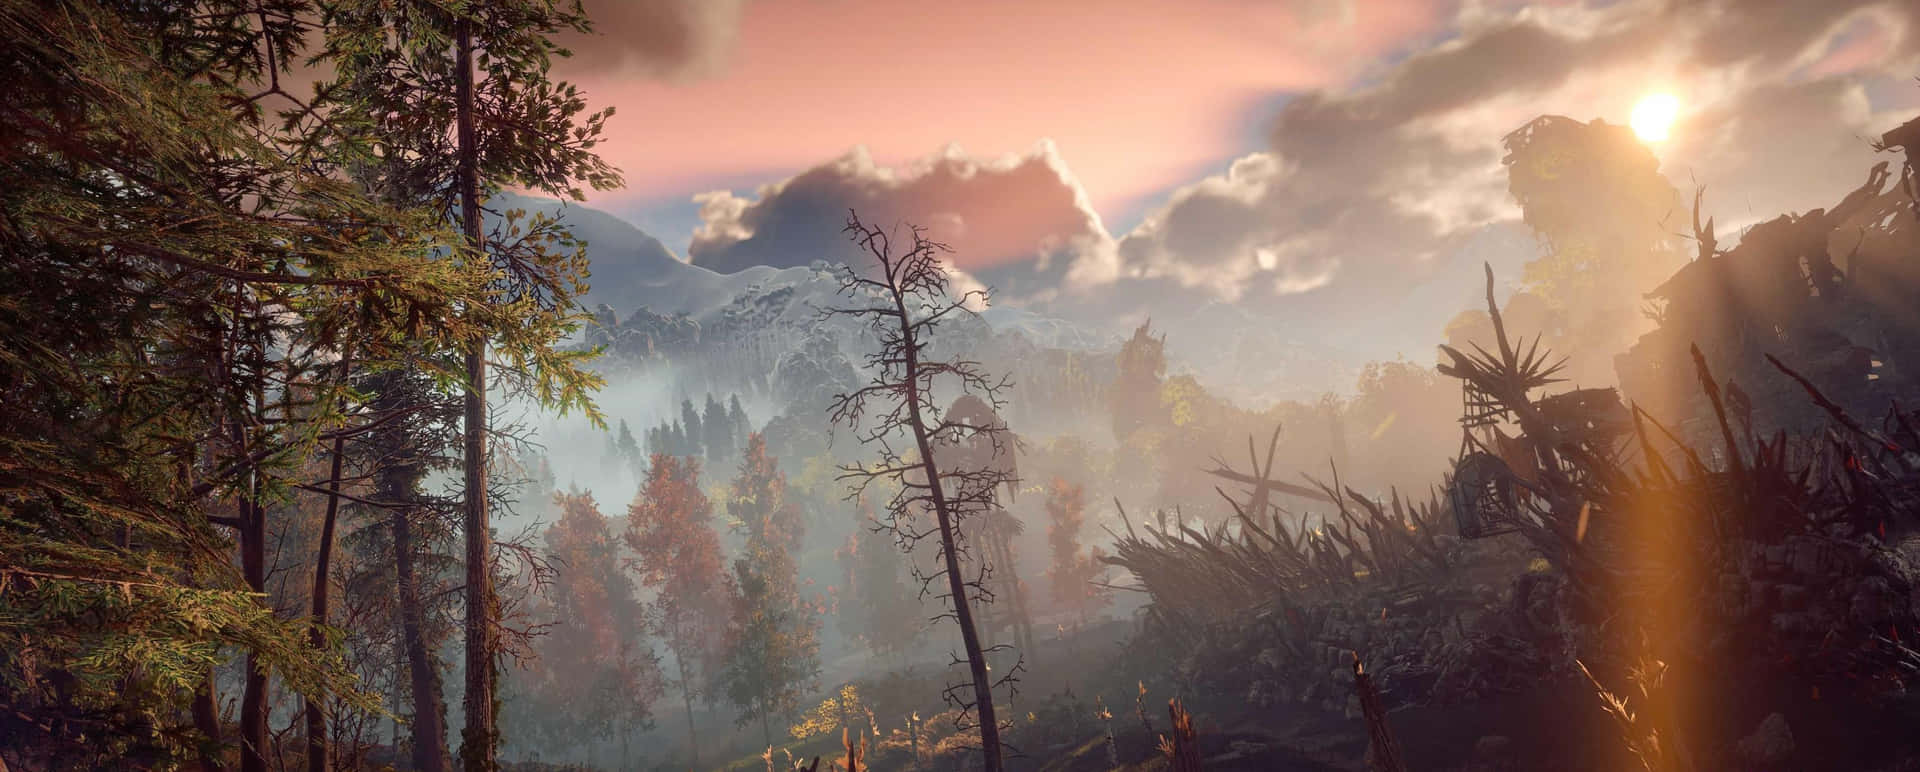 Explore Far Cry New Dawn's breathtakingly vast world of hope and redemption